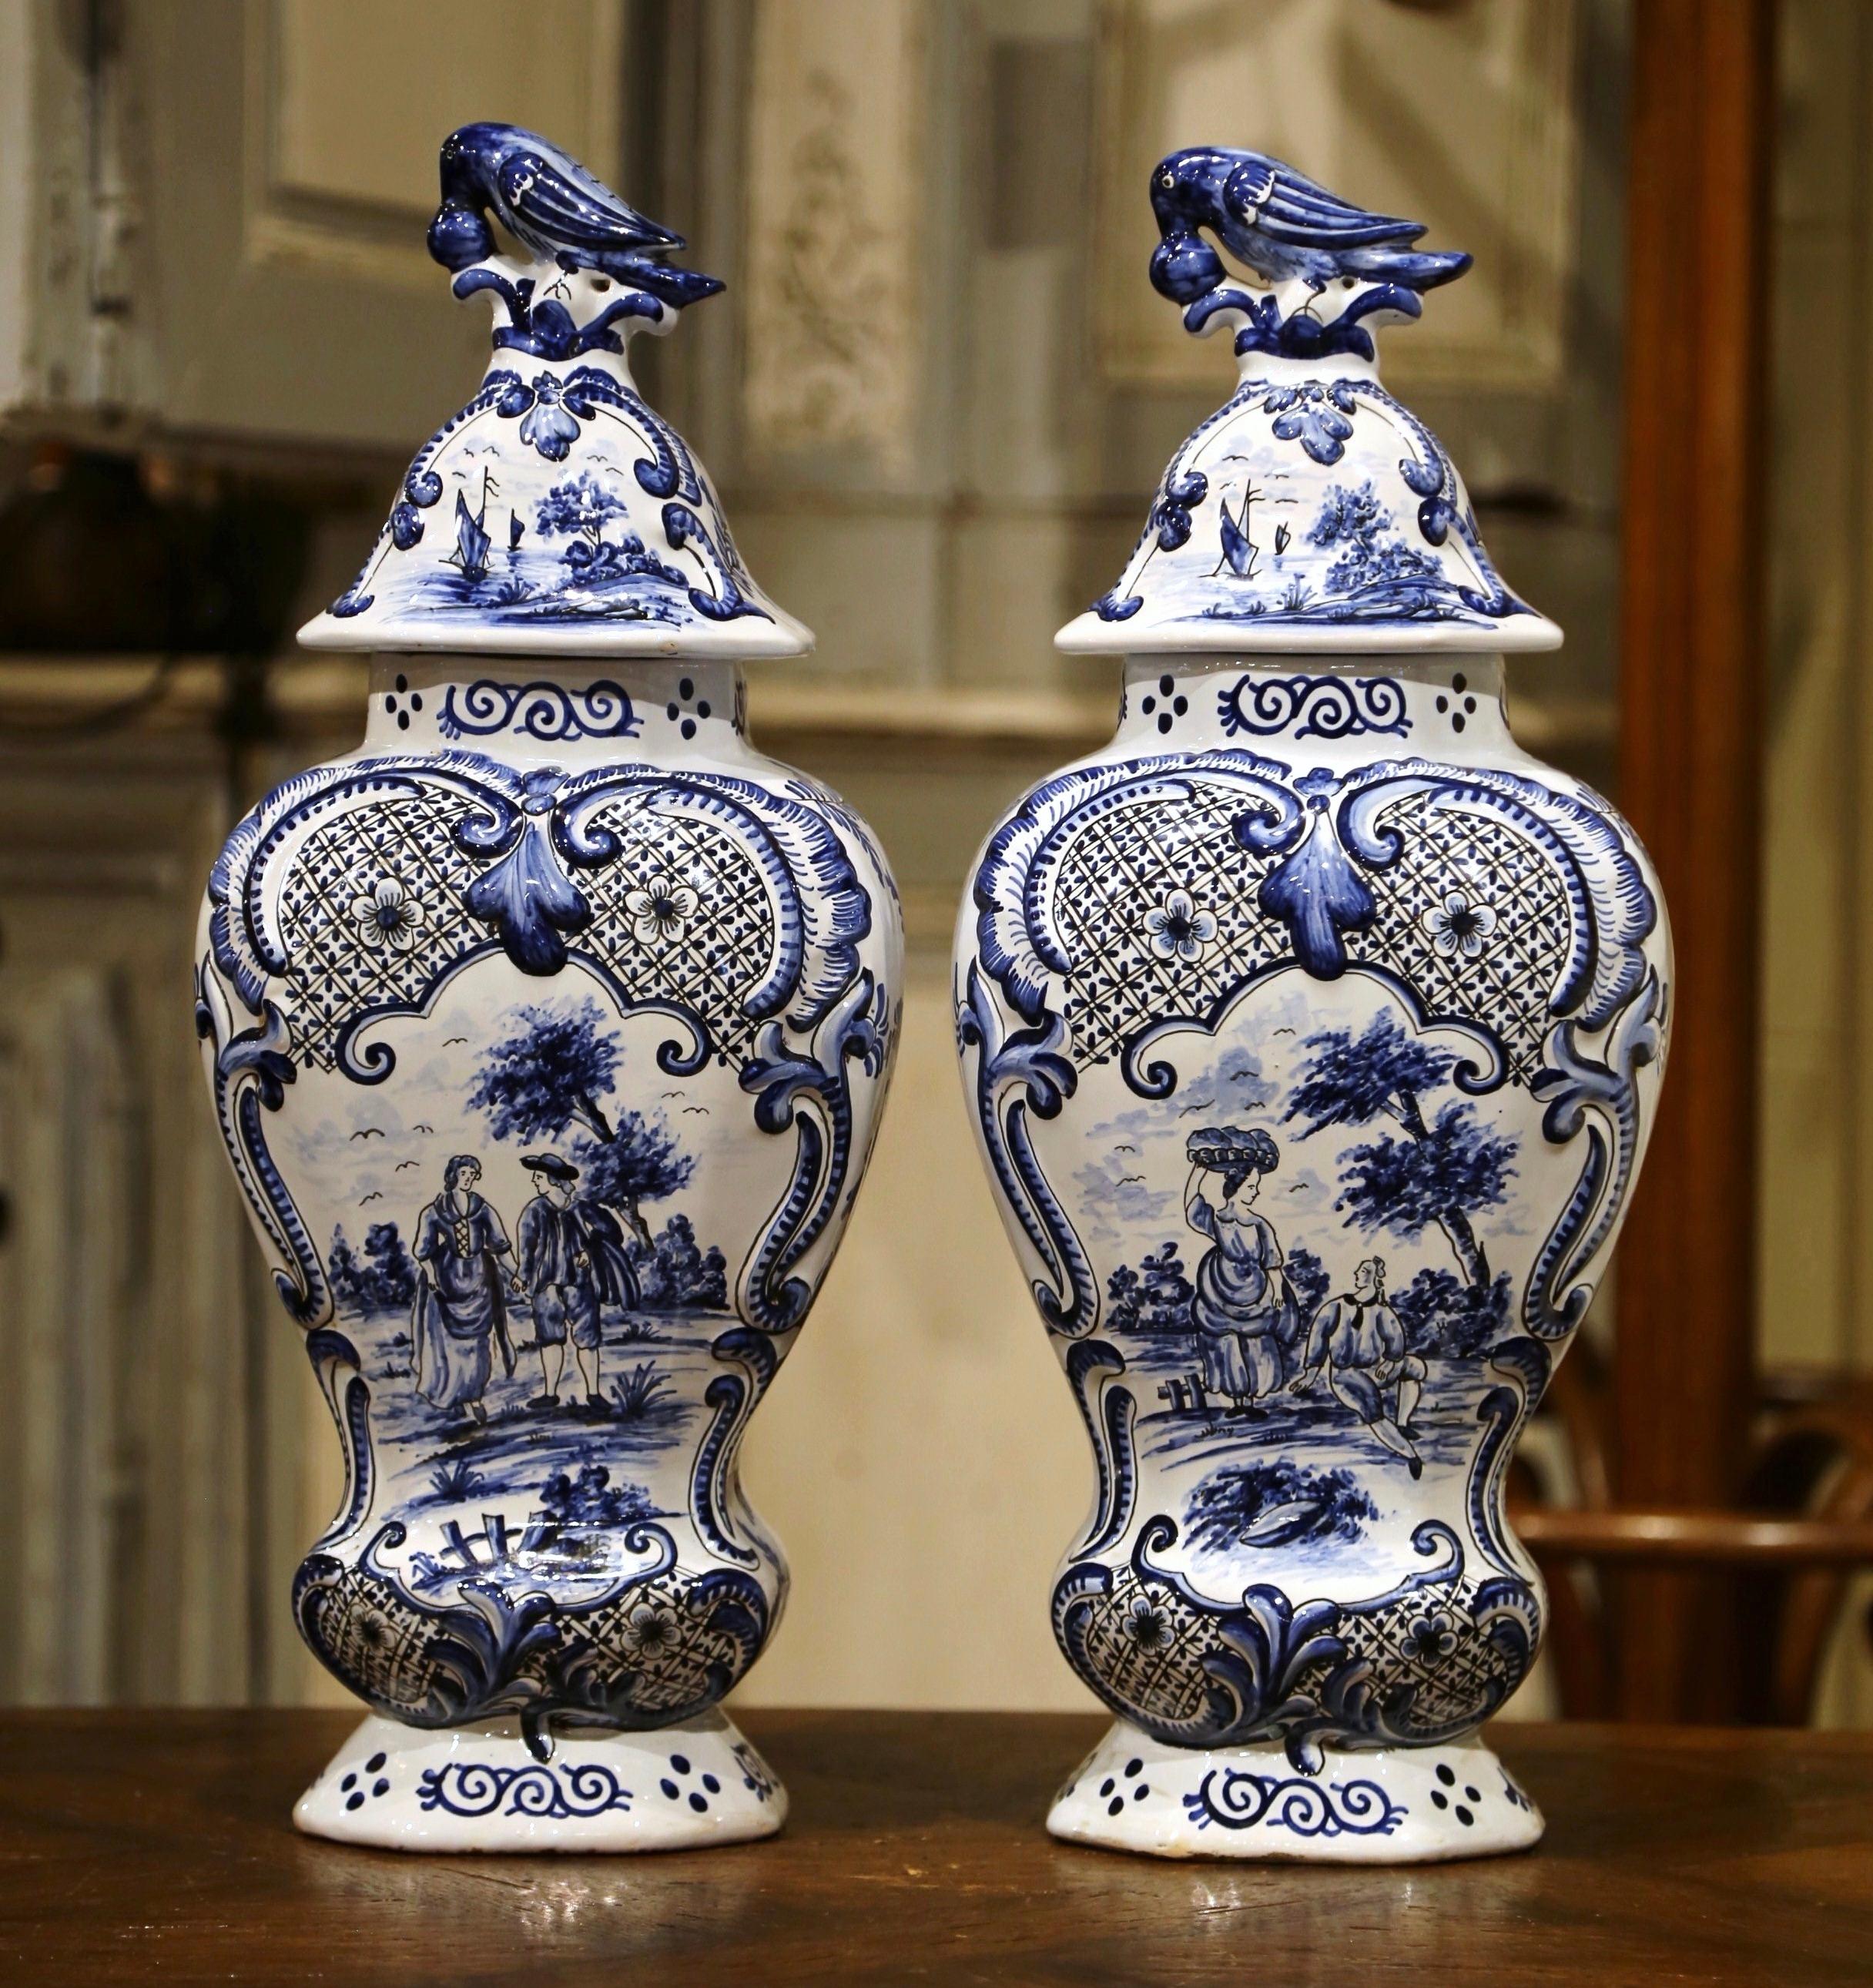 Ceramic Pair of Mid-19th Century French Blue and White Faience Delft Vases with Lids